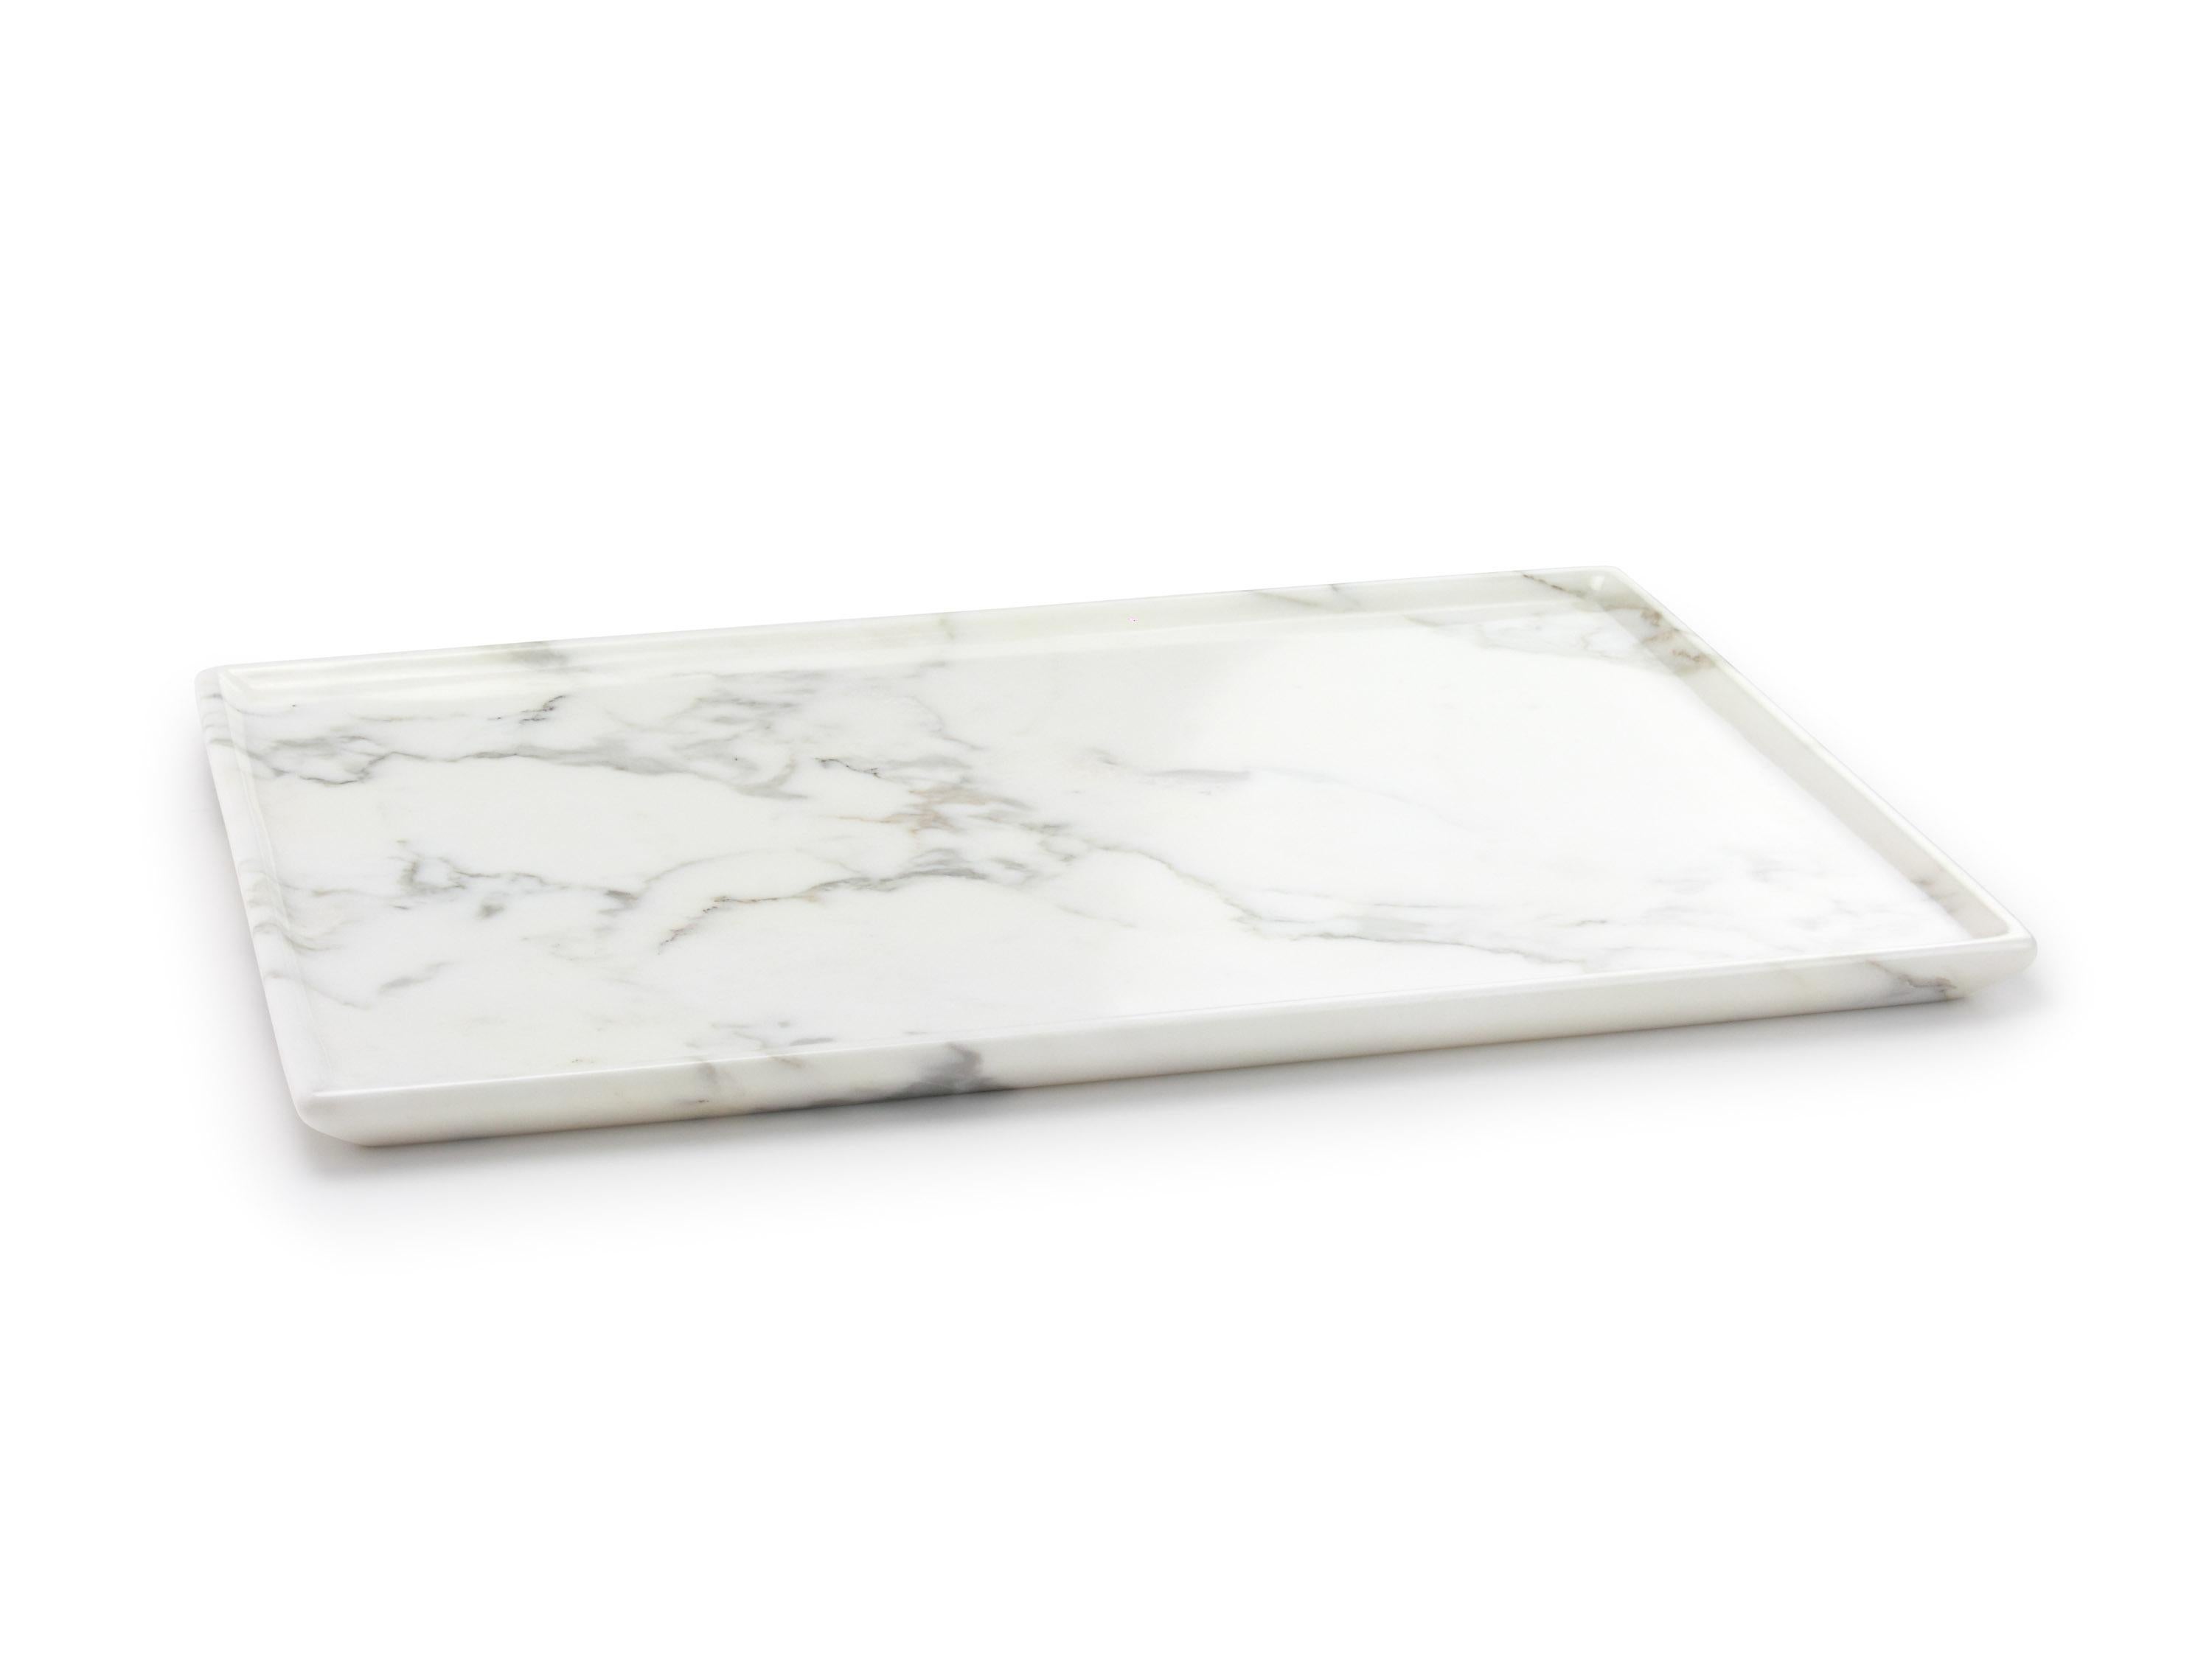 Tray or serving plates carved by hand from a solid block of white Calacatta marble. Tray dimensions: L 40, W 29.5, H 2 cm, available in different marbles and onyx.

Marble is a natural material, every piece is unique as each onyx block is different